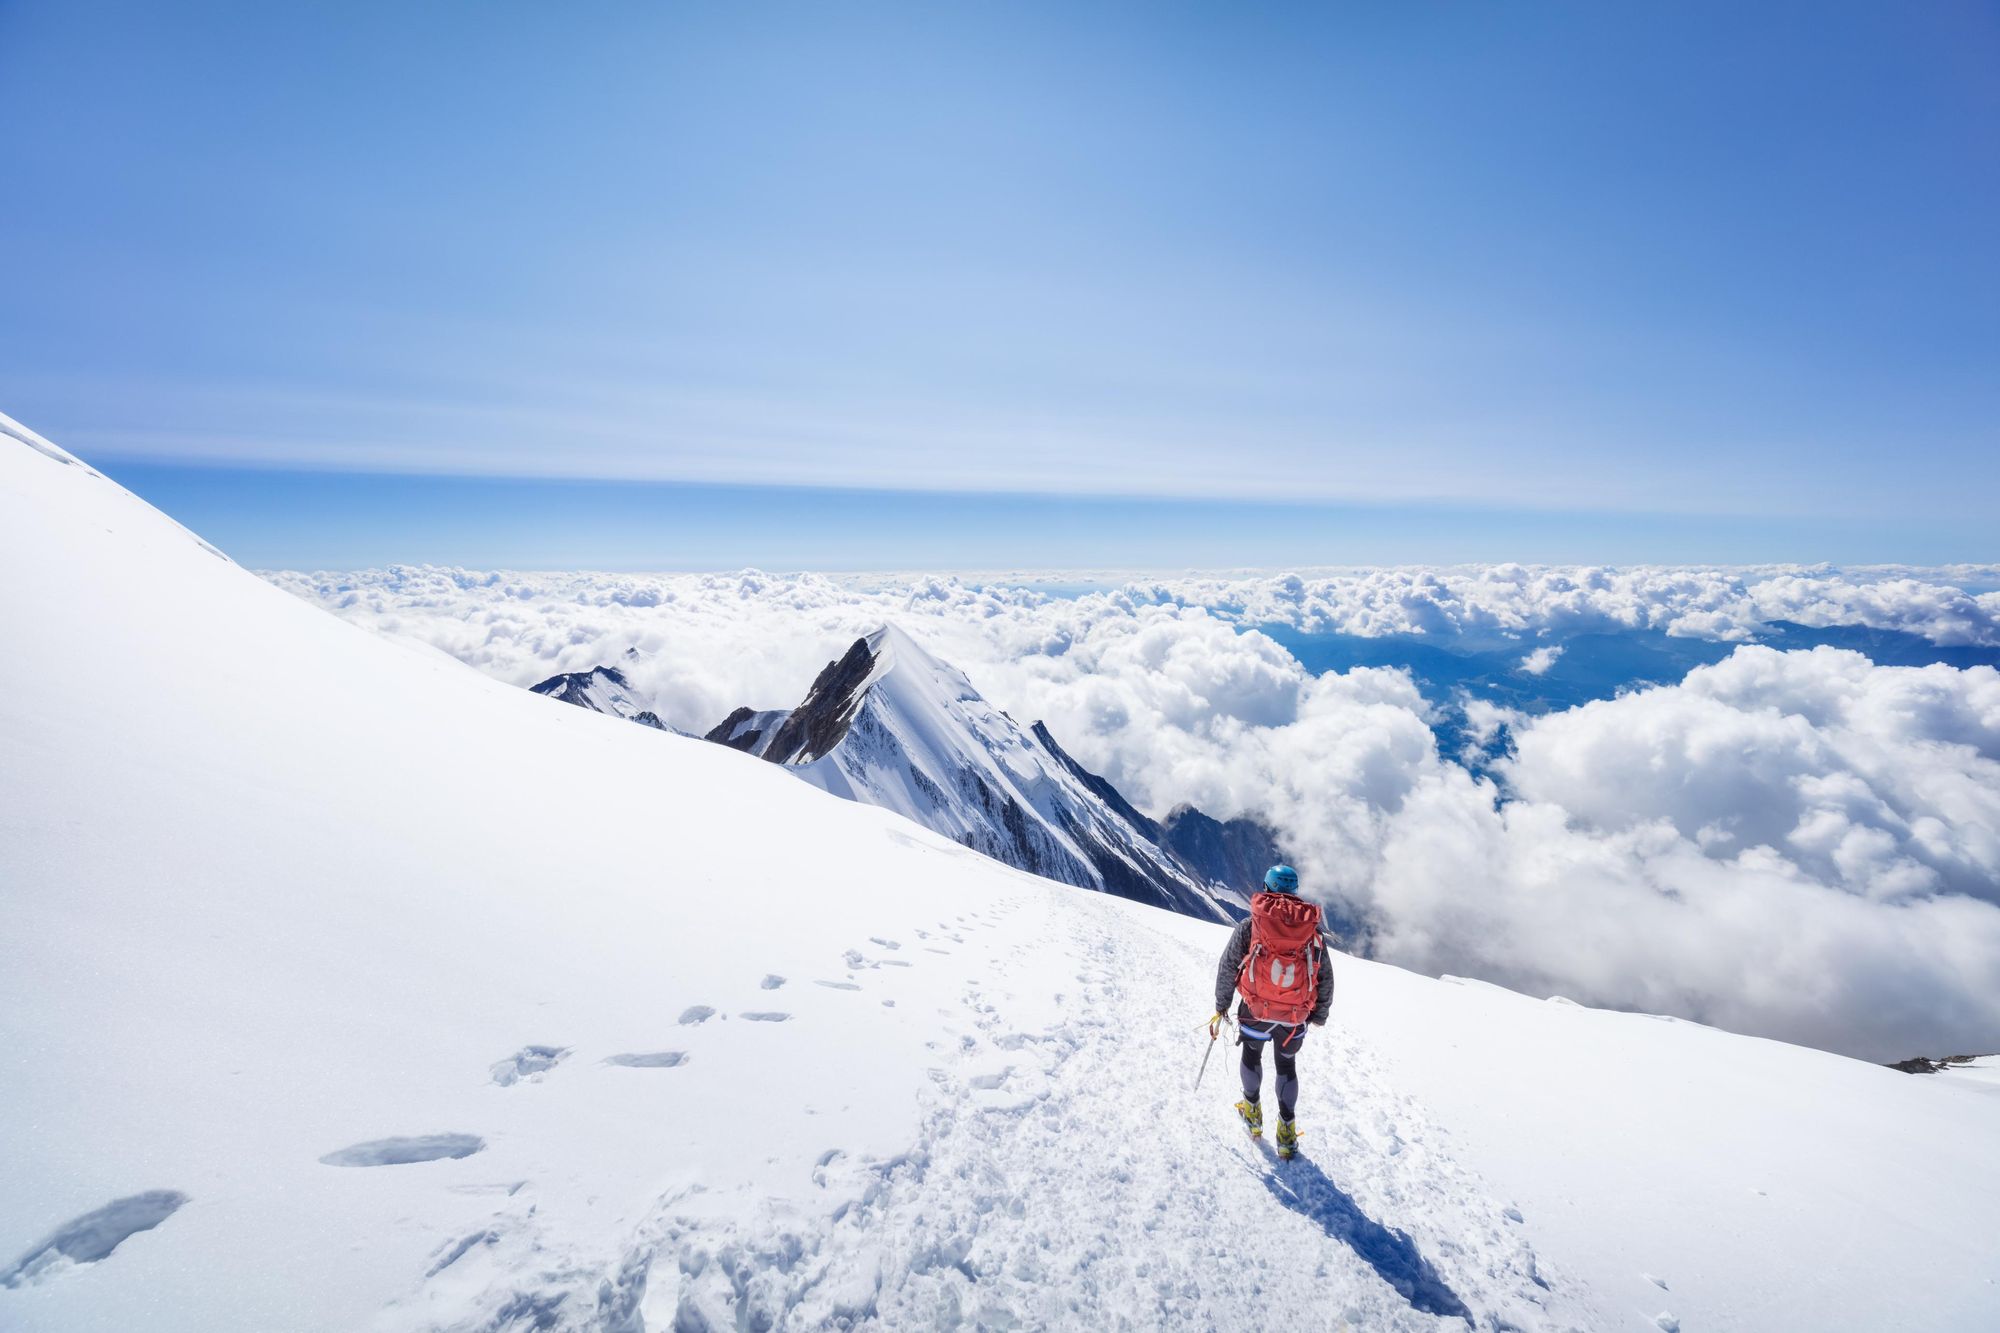 An ascent of Mont Blanc - challenging yourself is an important part of adventure. Photo: Lena Serditova.